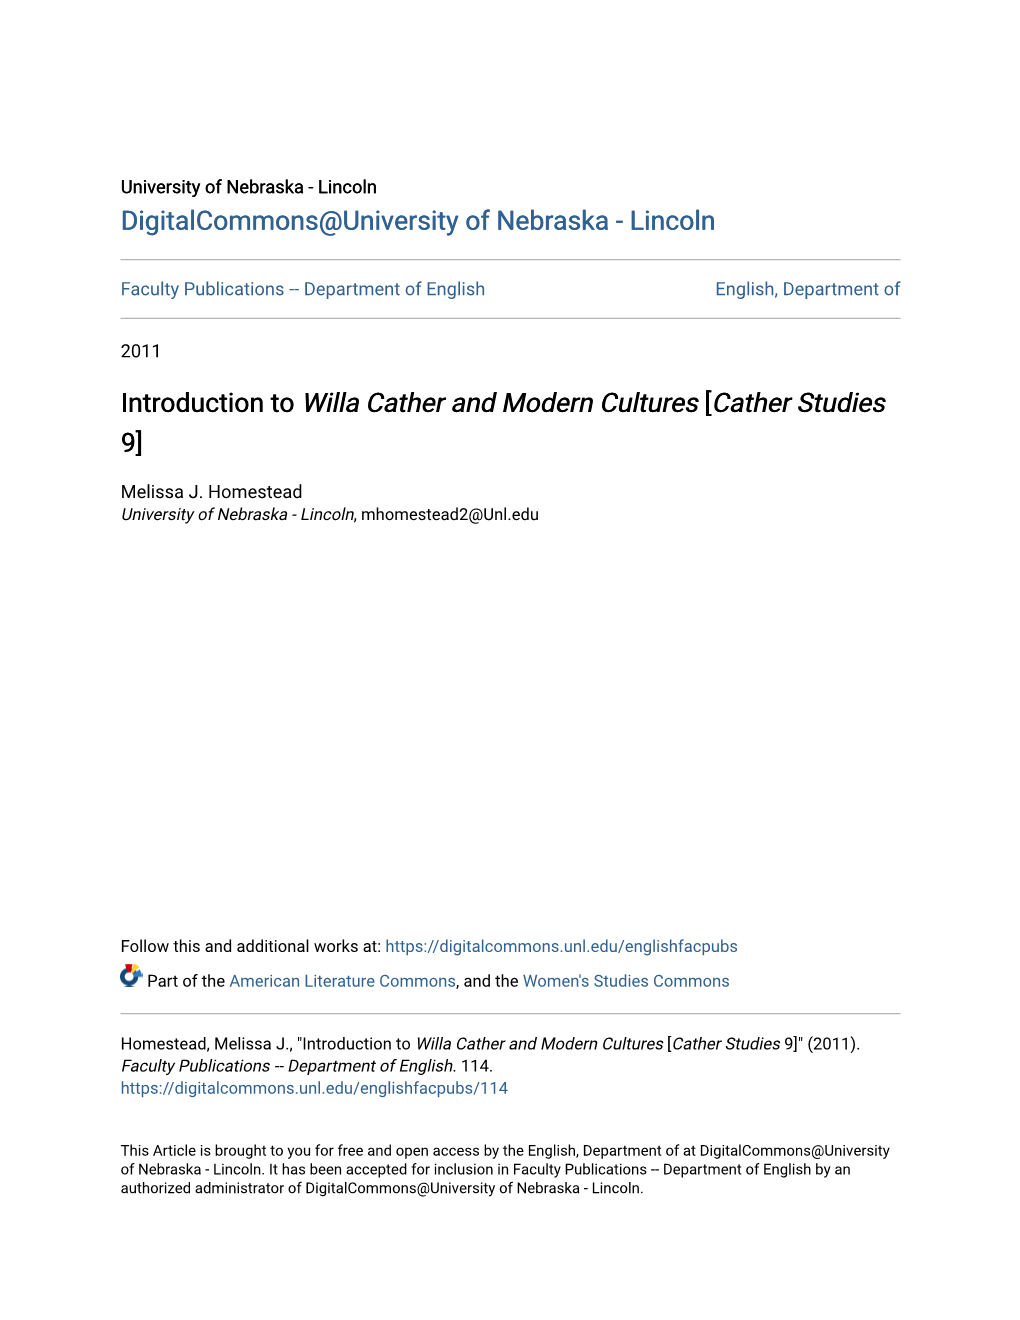 Introduction to Willa Cather and Modern Cultures [Cather Studies 9]